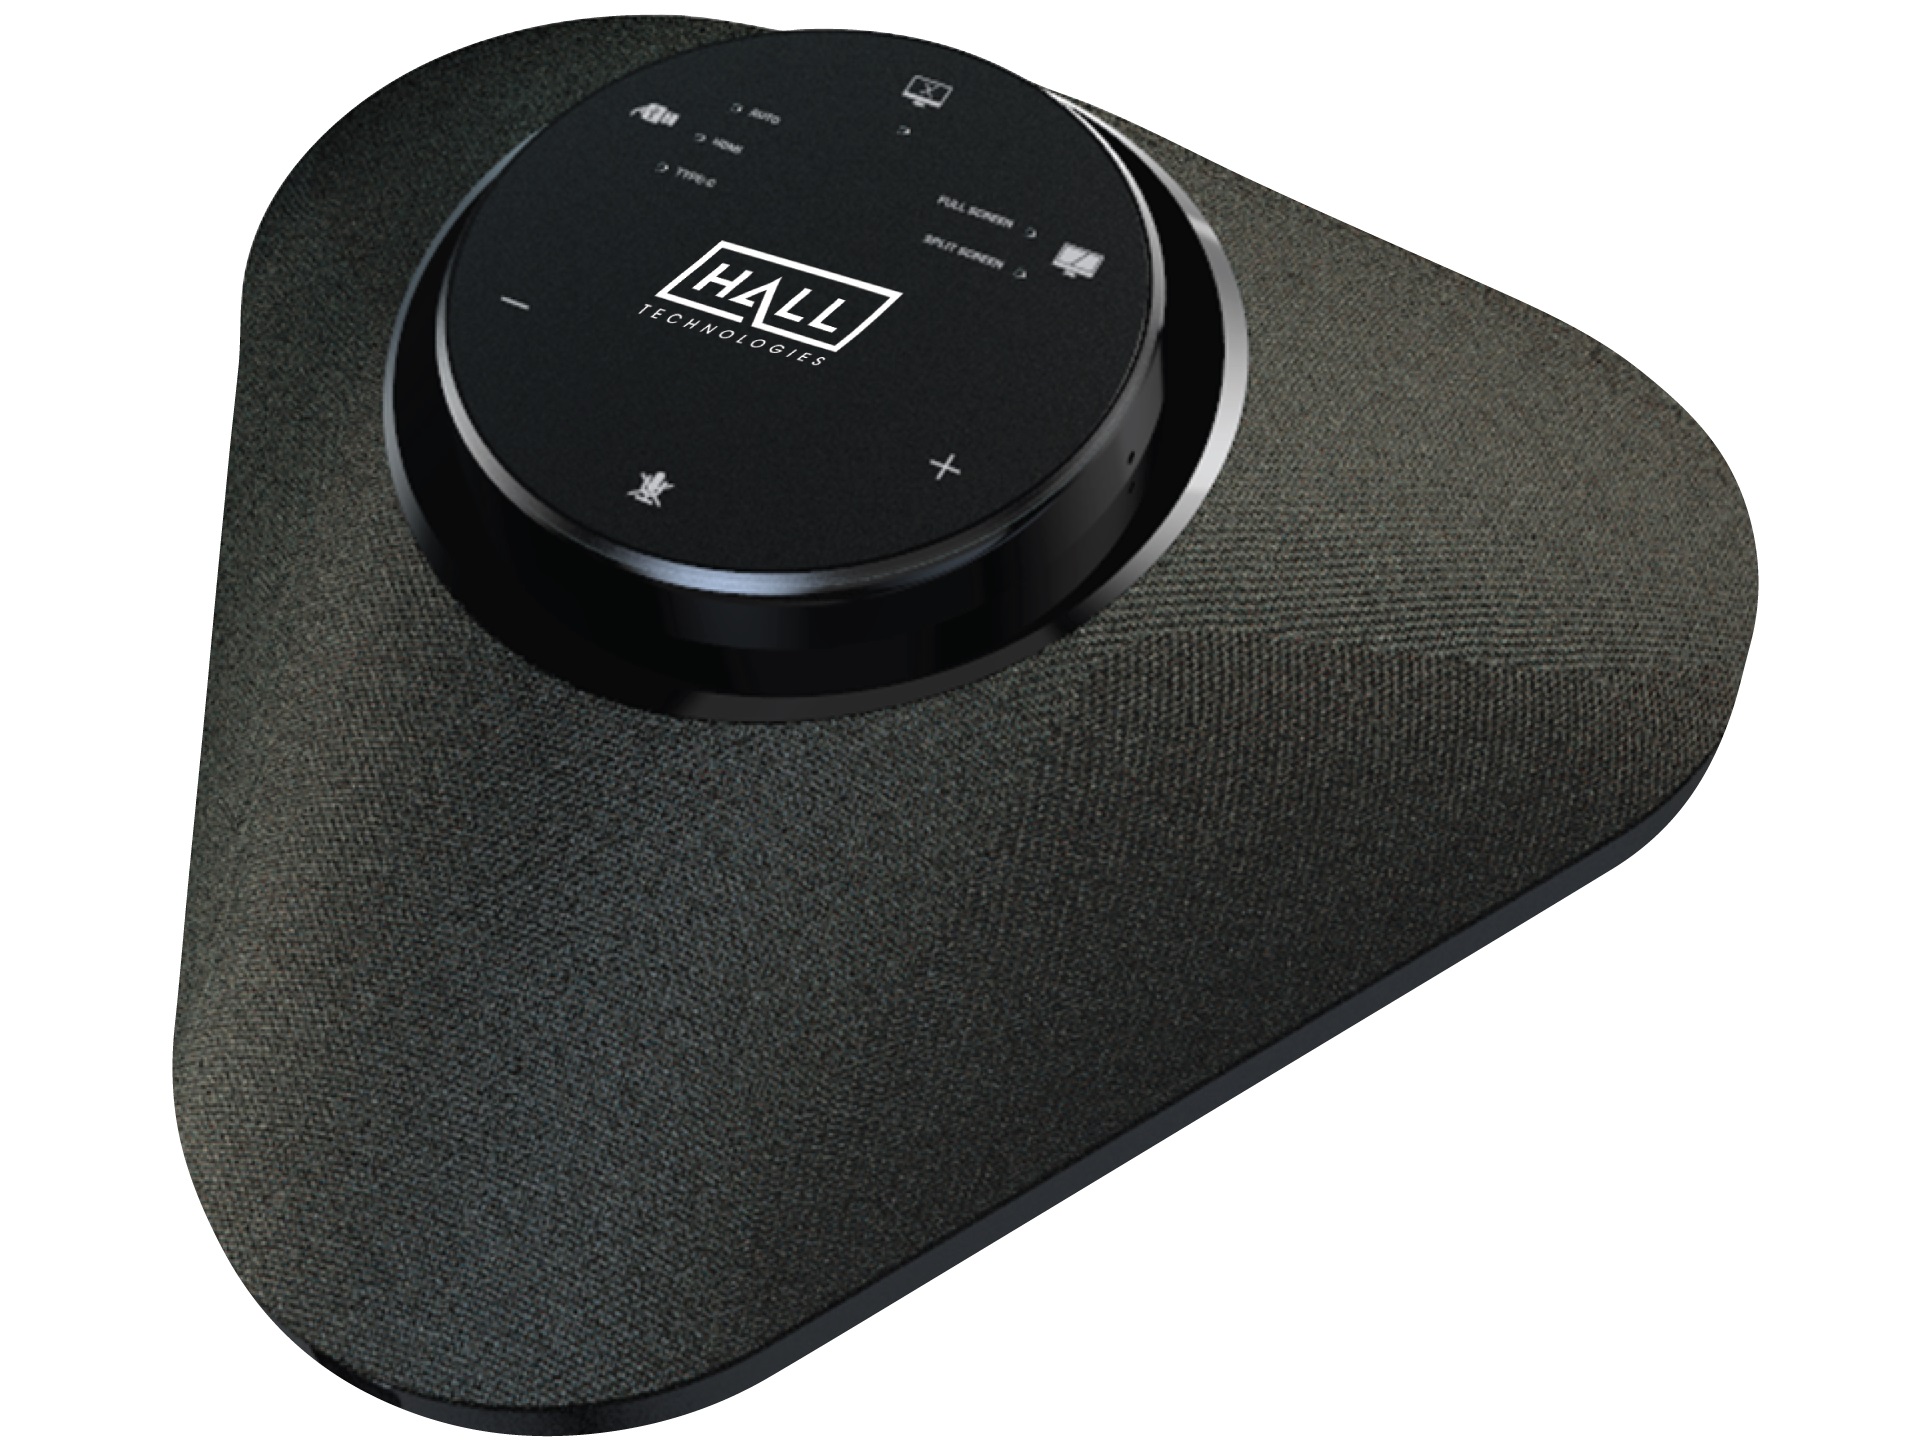 HT-ODYSSEY Conference Speakerphone with Video Presentation and BYOD by Hall Technologies